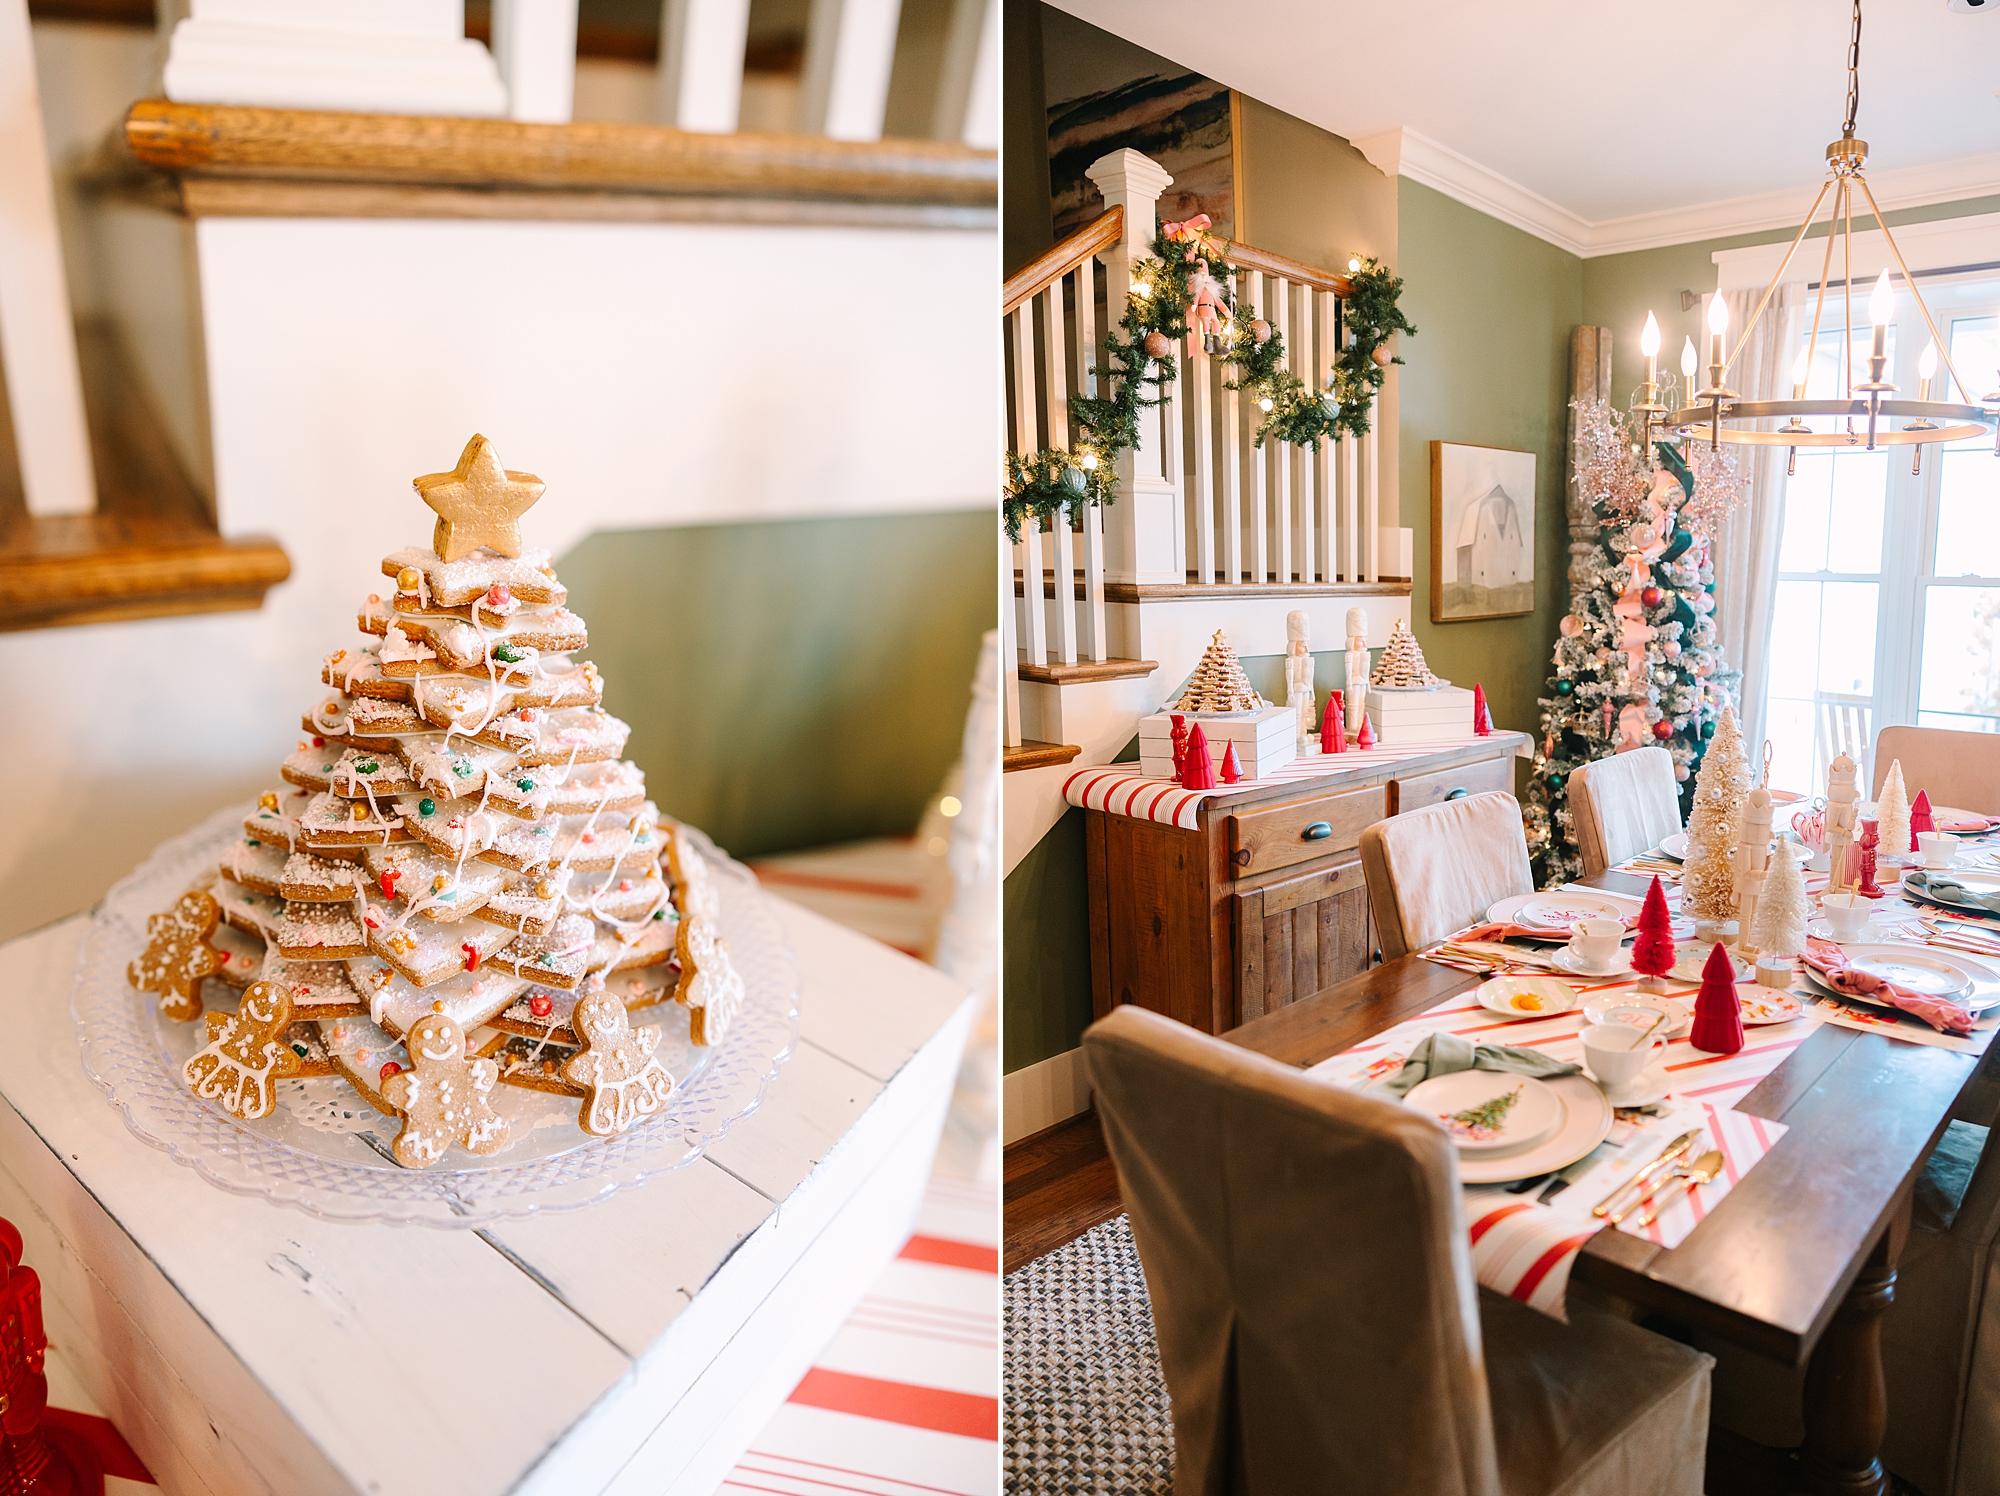 Nutcracker inspired tea party with Pretty Lovely Tea in Brentwood TN home